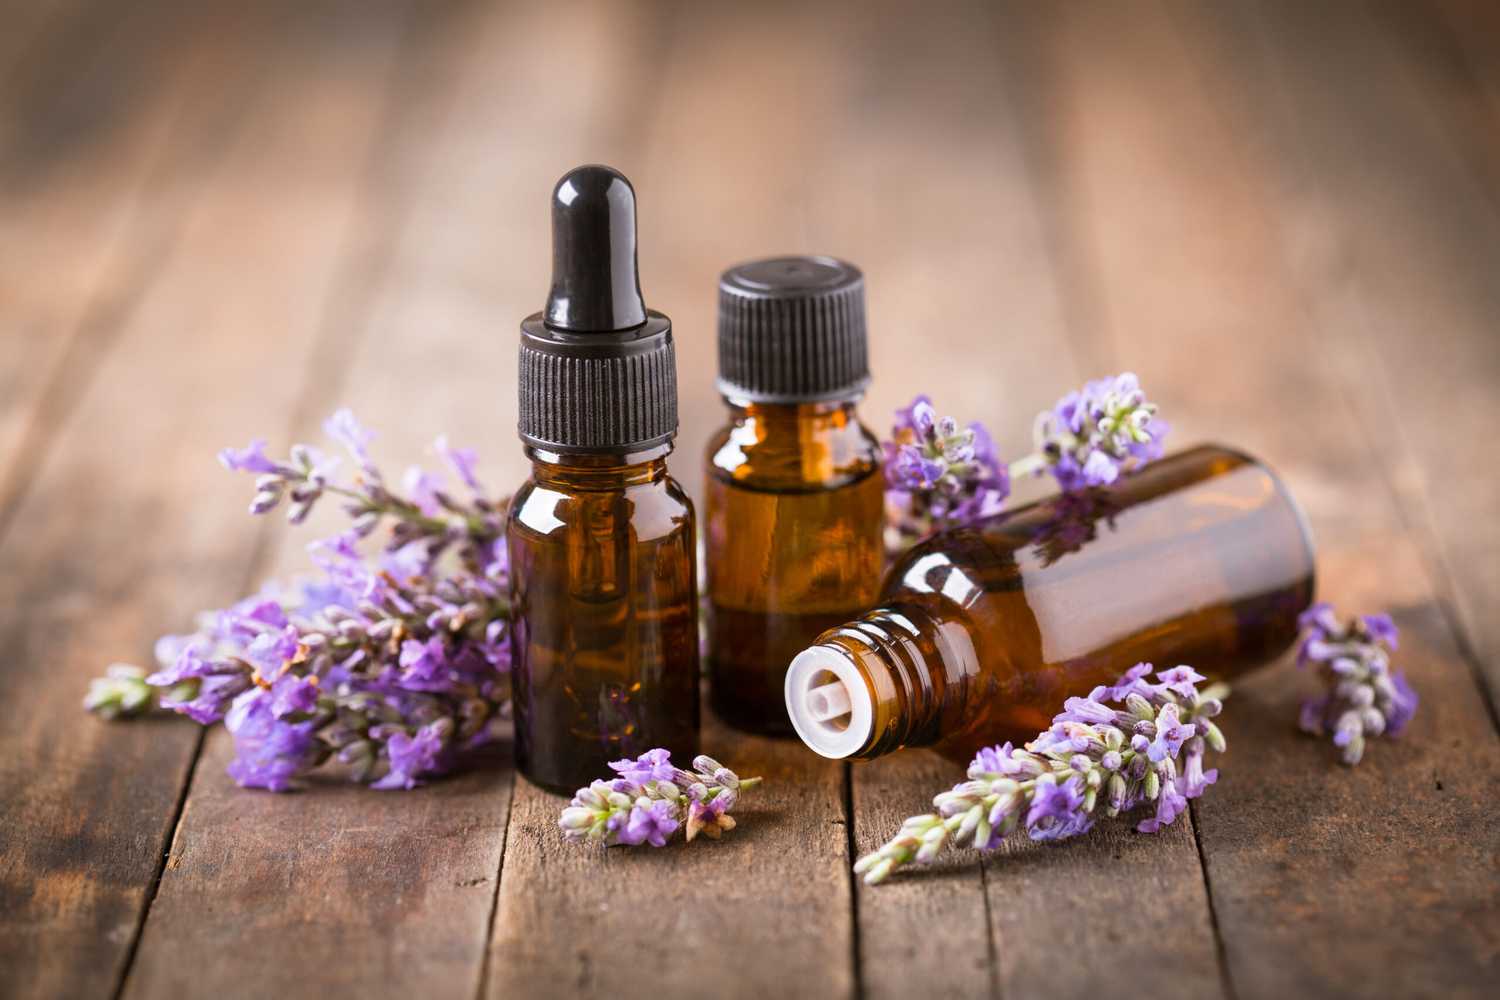 Lavender – The Plant and its Use in Skin Care